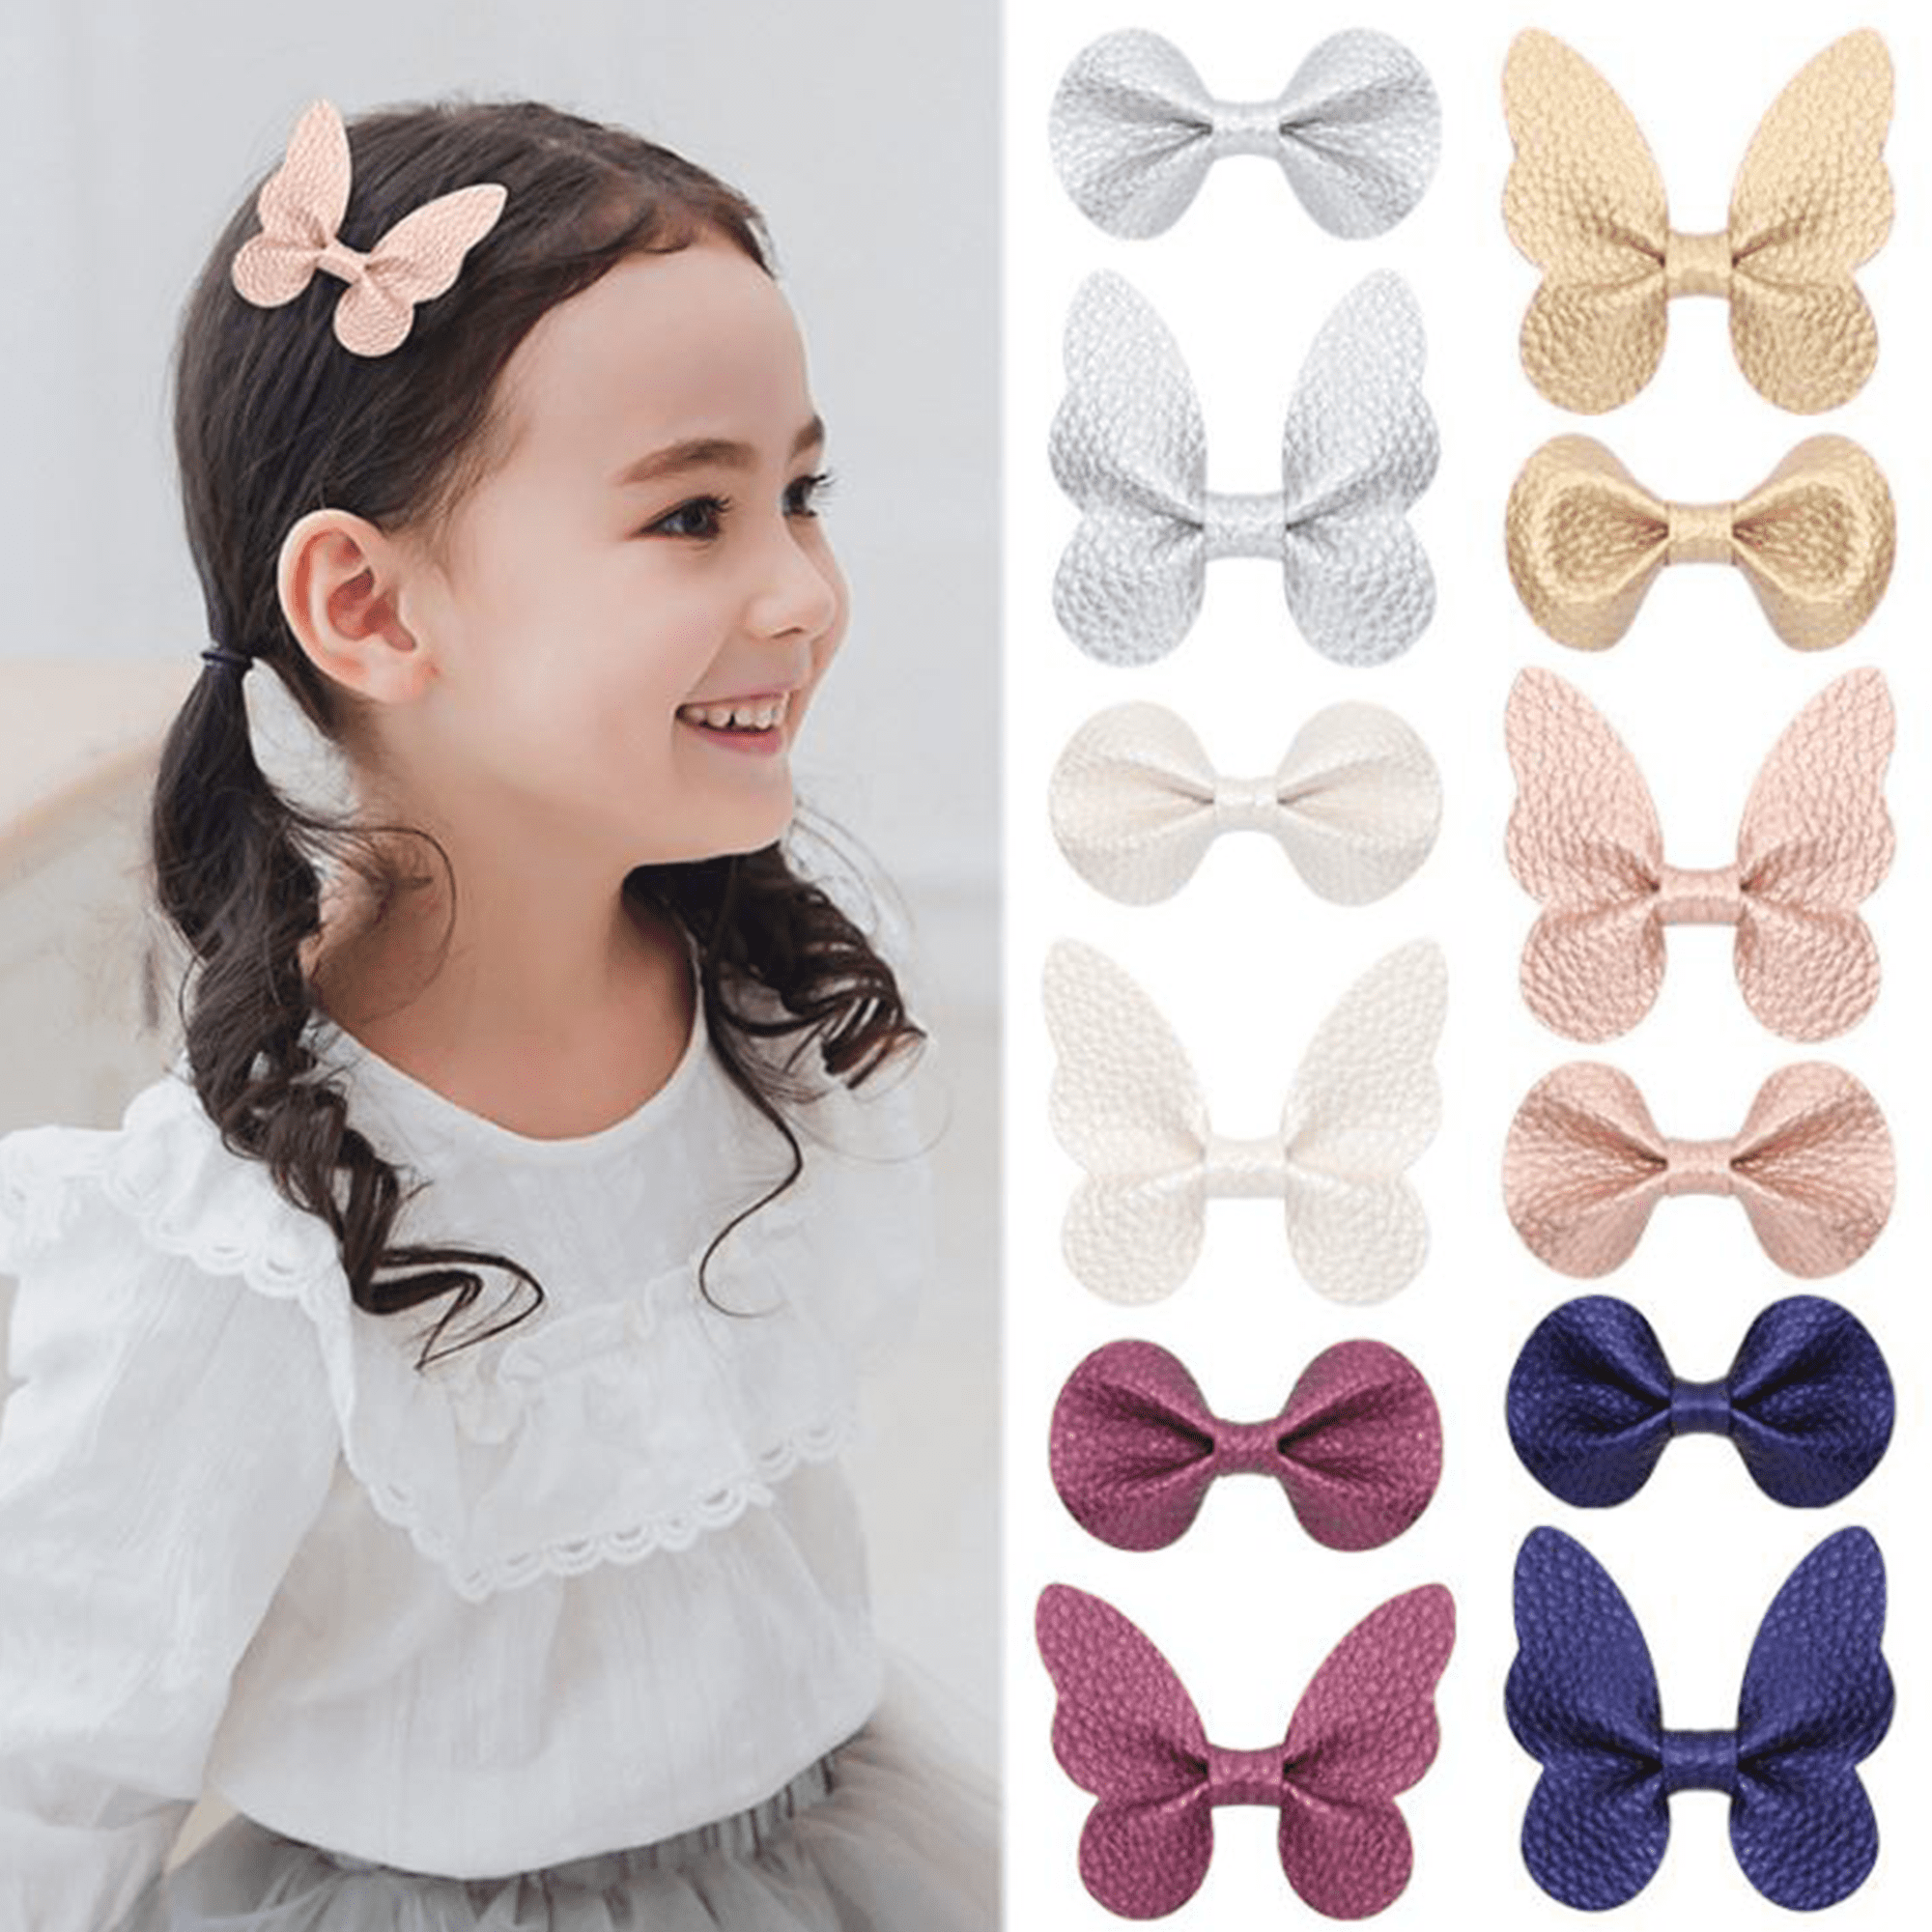 7 Piece Pink Bow Hair Set Childrens Hair Accessory Clips Bobbles Headband Bendie 